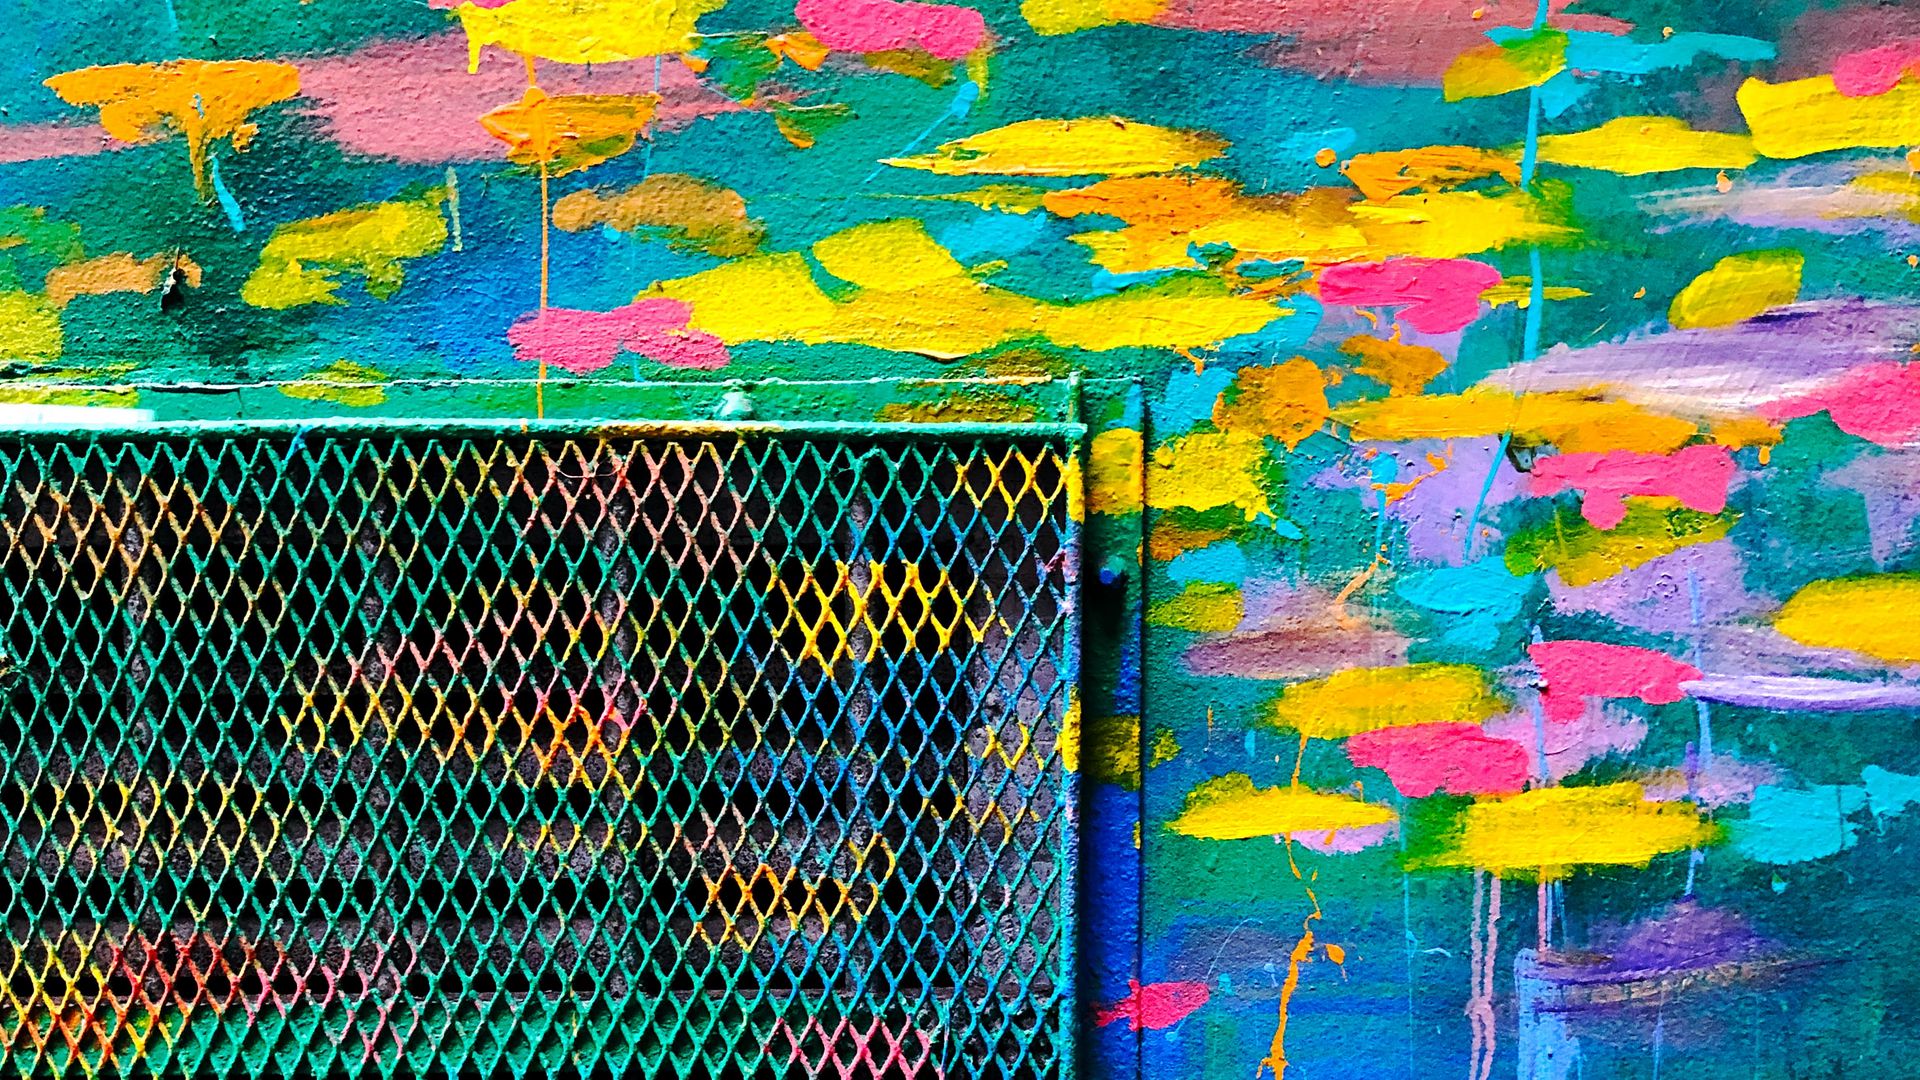 Download wallpaper 1920x1080 grille, paint, wall, colorful, street art ...